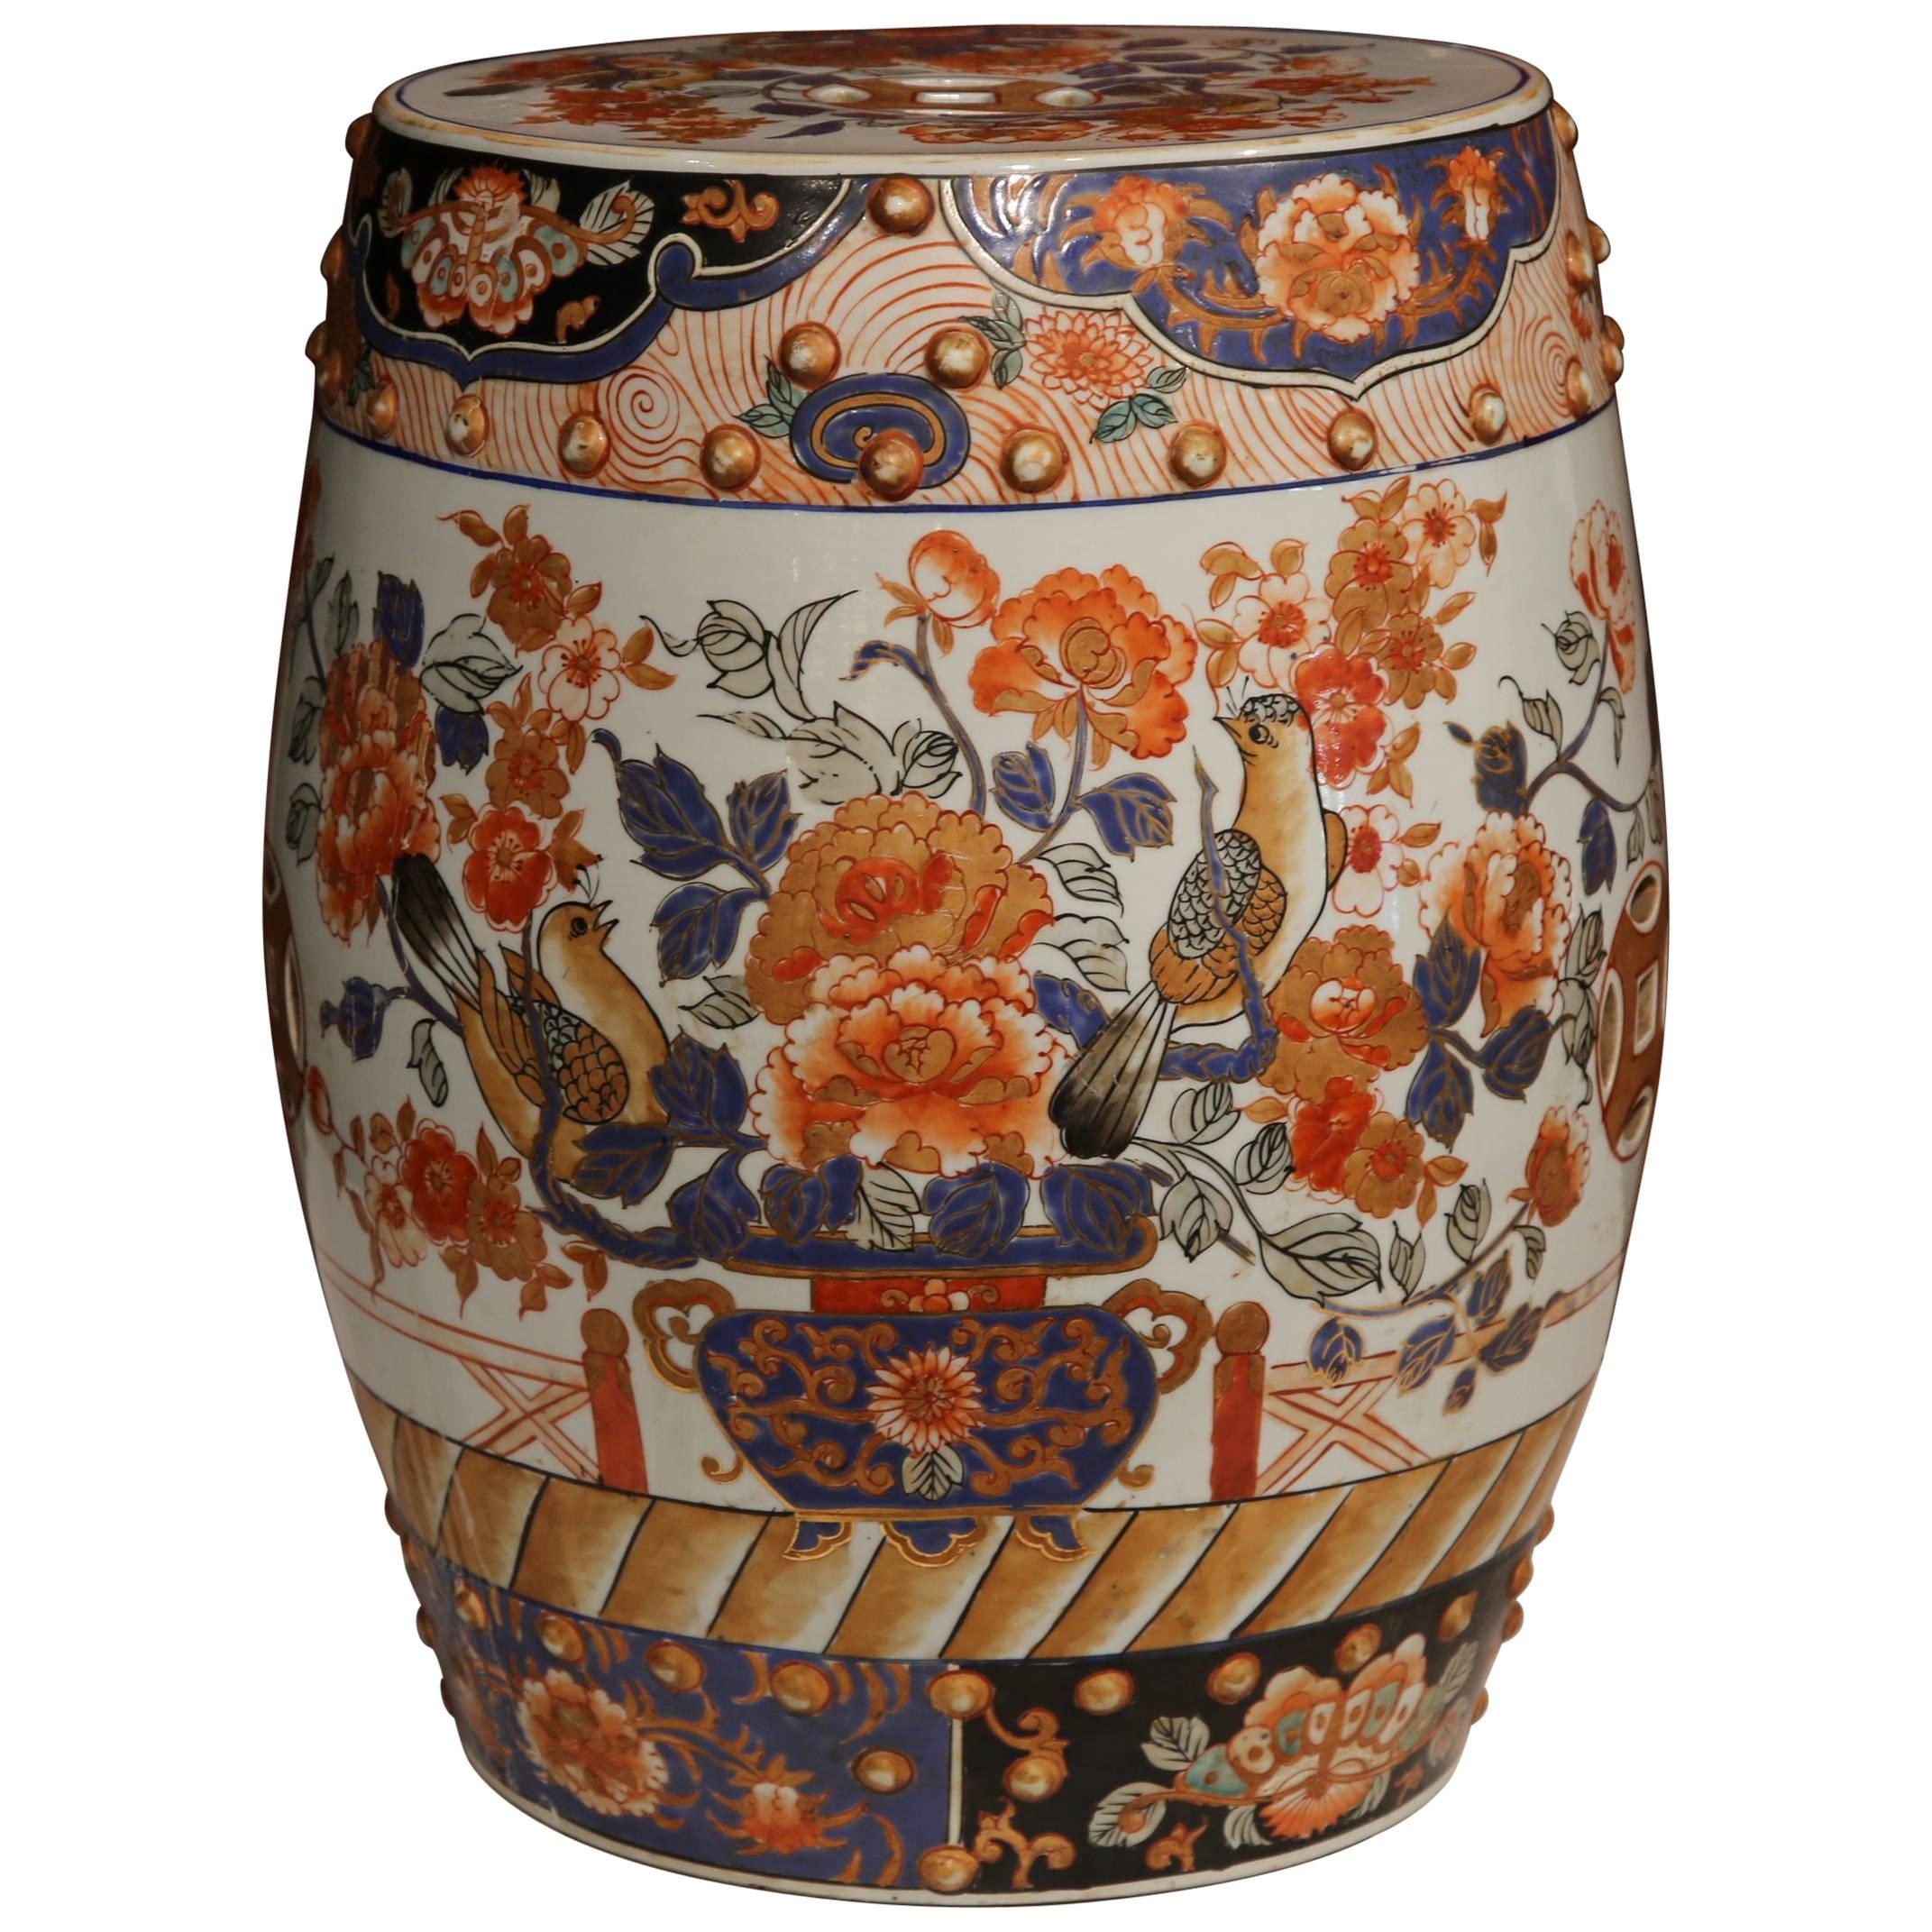 19th Century Japanese Hand-Painted Porcelain Imari Stool with Birds and Flowers